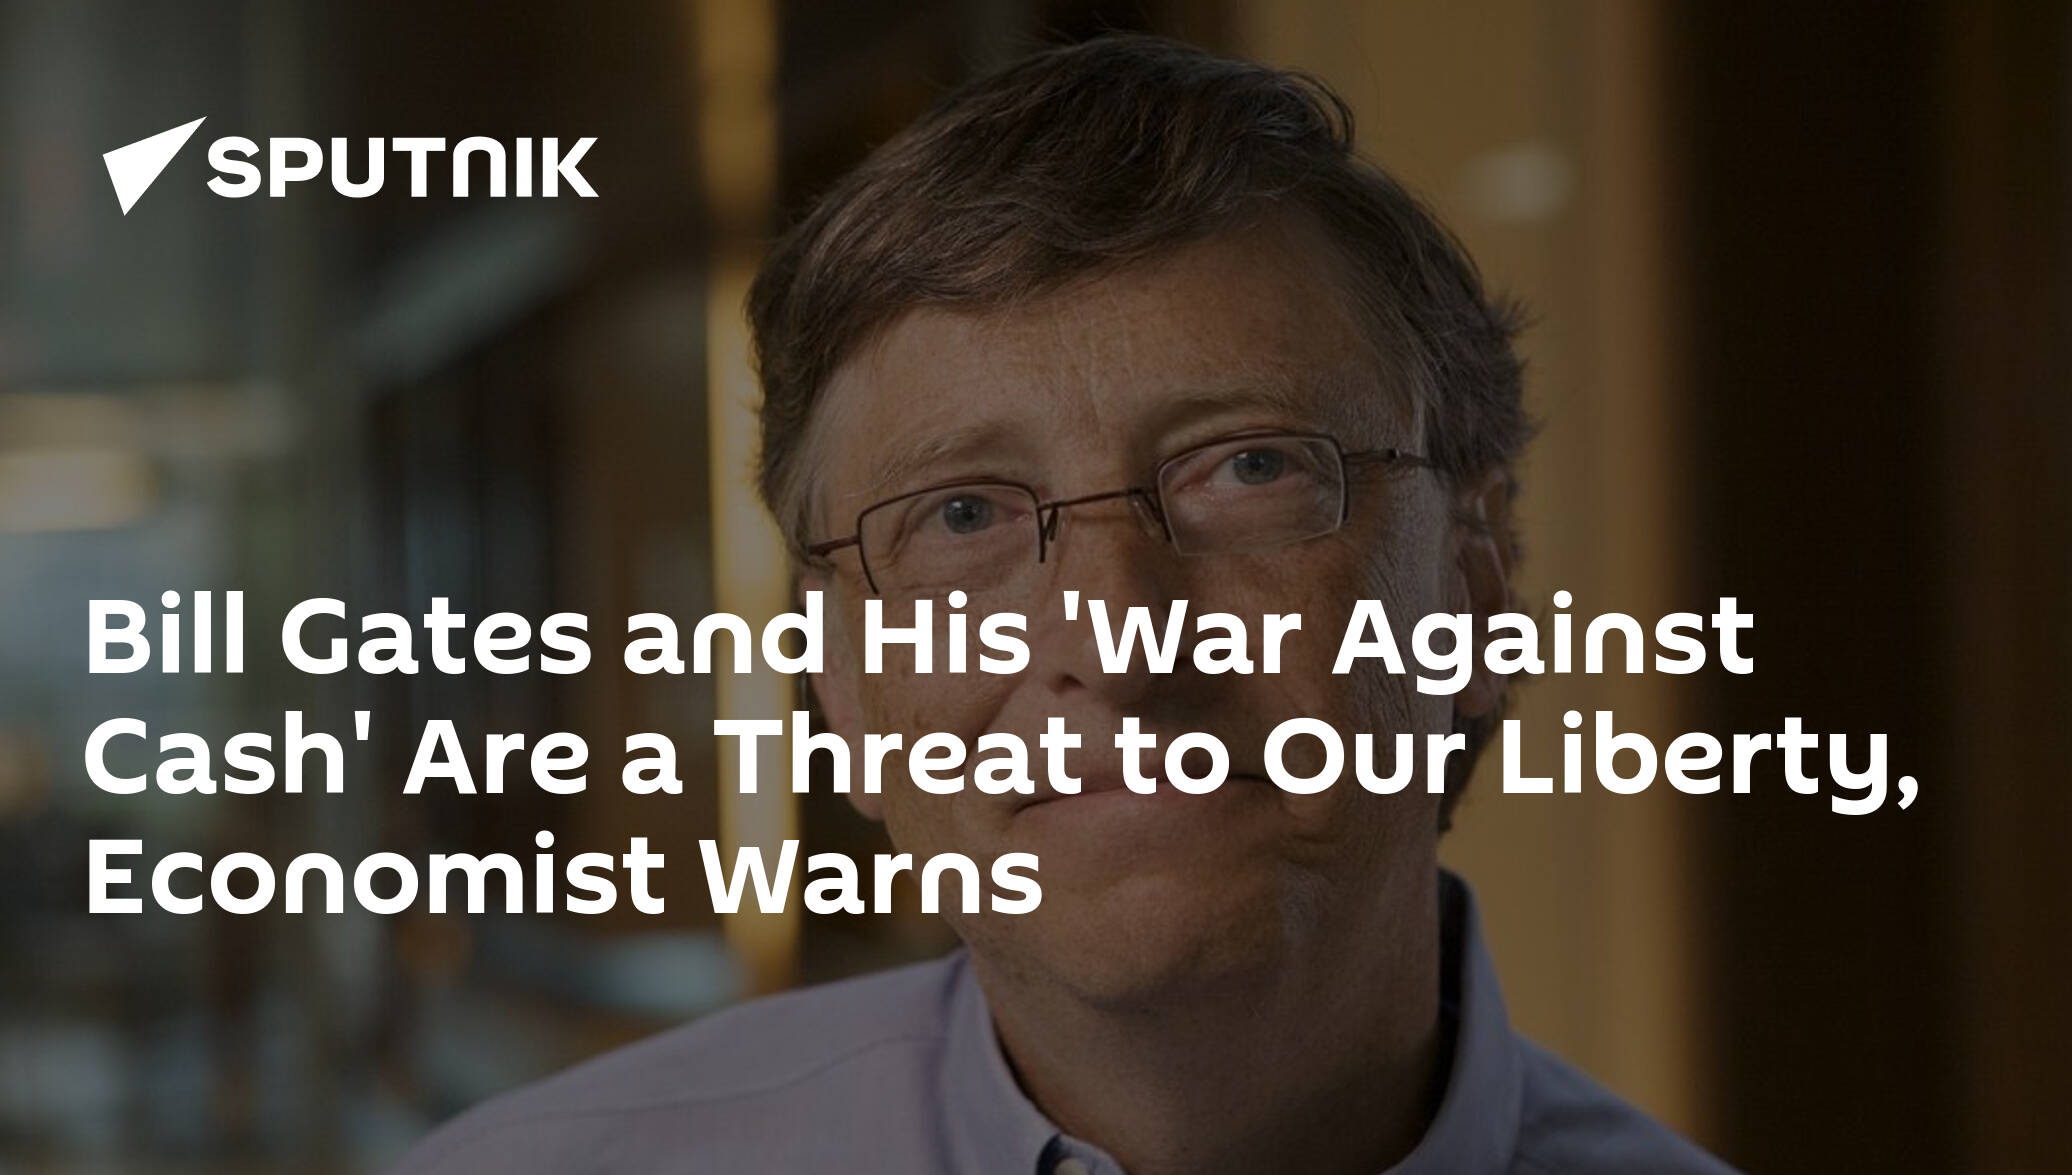 Bill Gates and His 'War Against Cash' Are a Threat to Our Liberty, Economist Warns